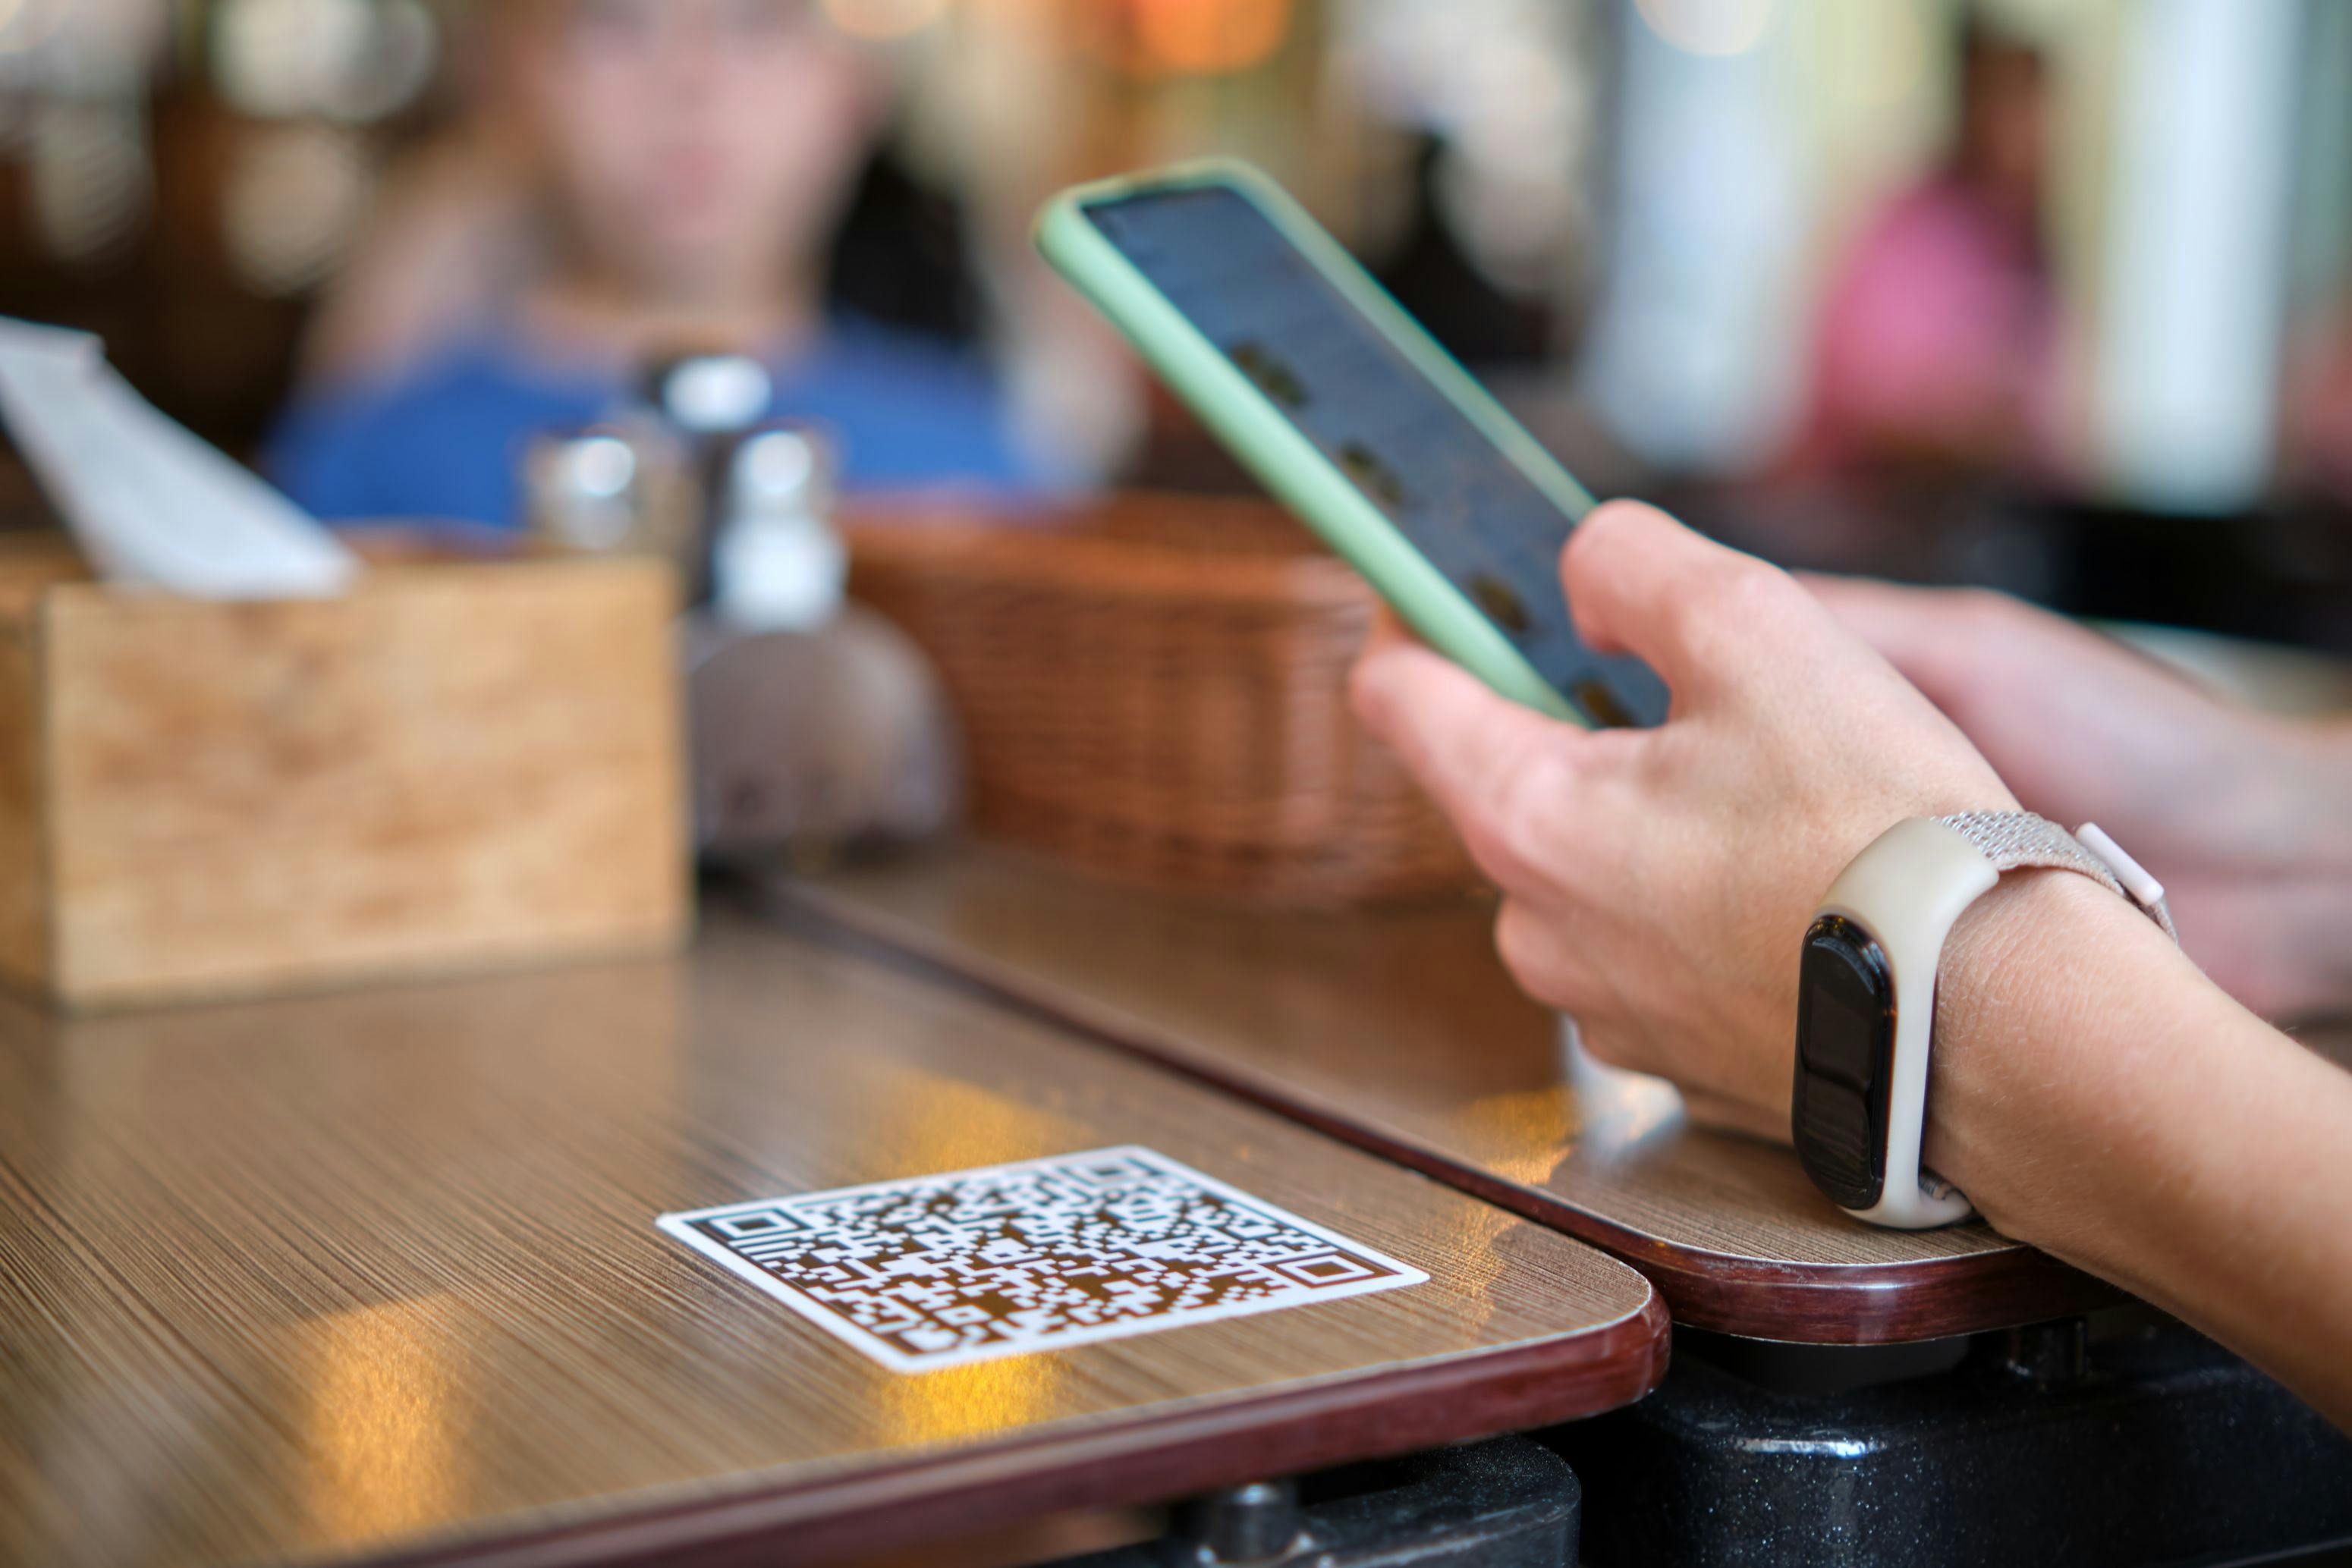 A person using a smartphone at a table, engaged in table ordering.